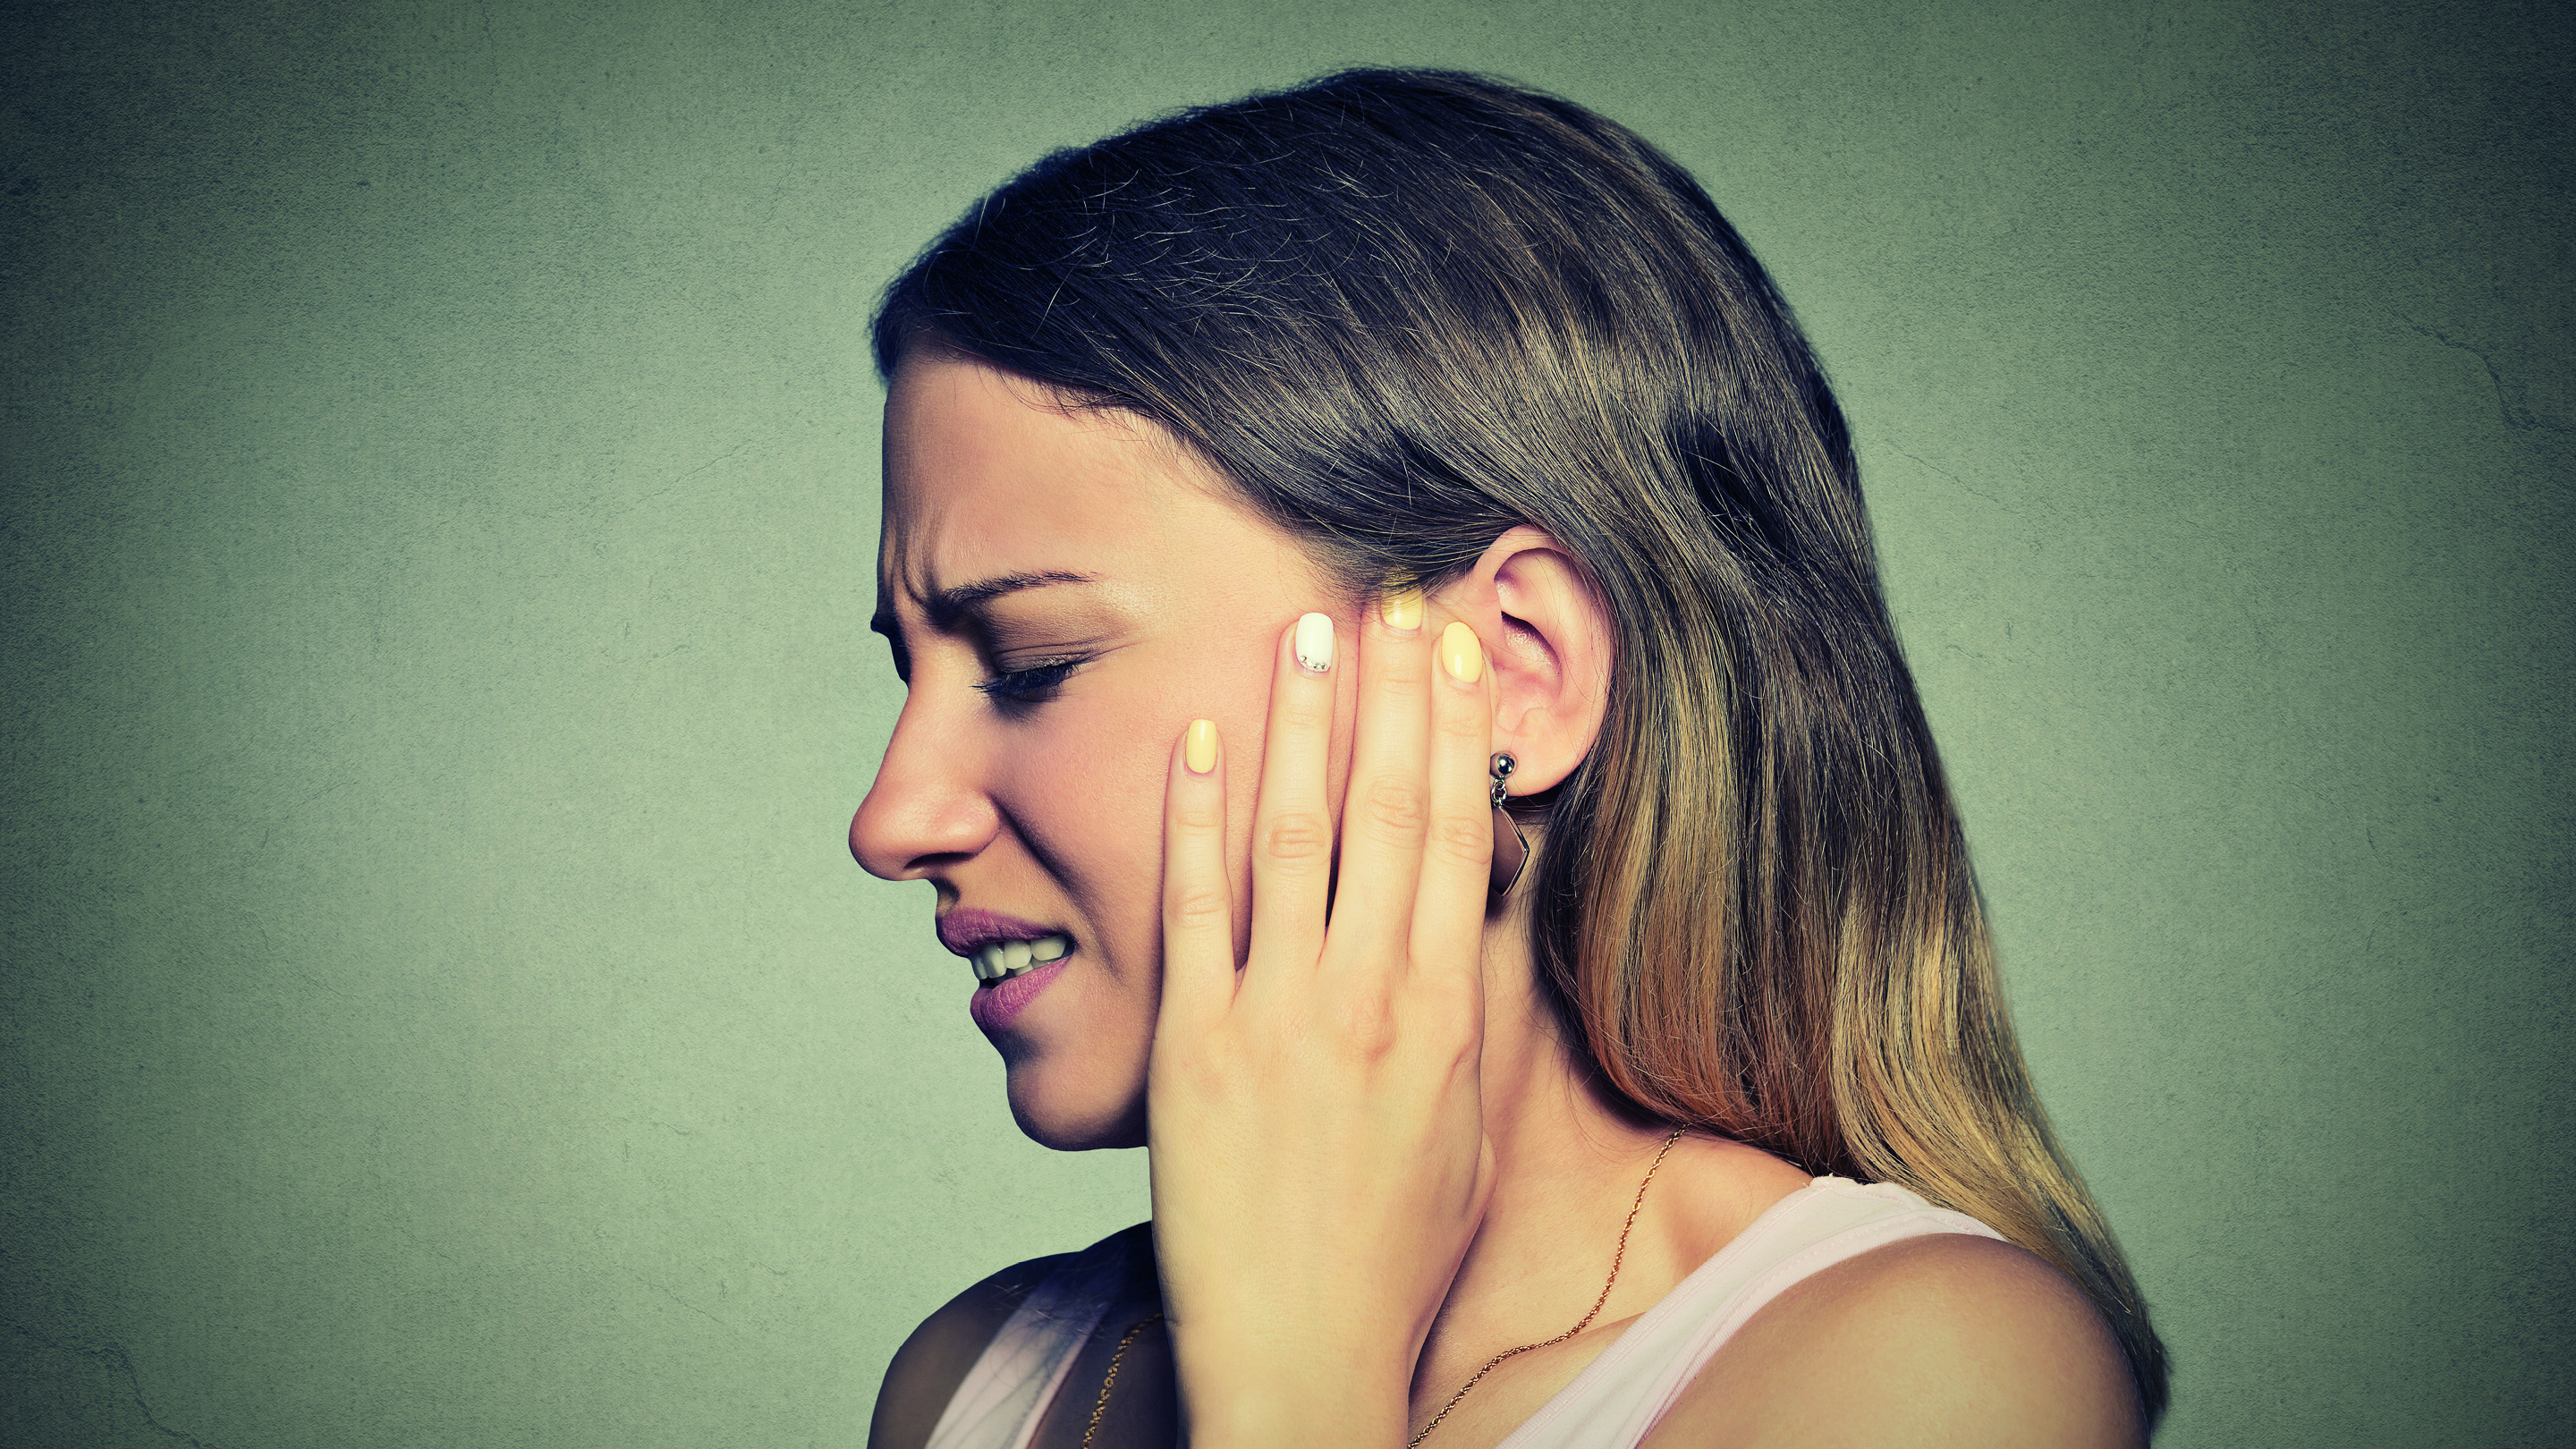 Coping with ringing ears: How to manage tinnitus - tips to find relief from  tinnitus: - Sivantos